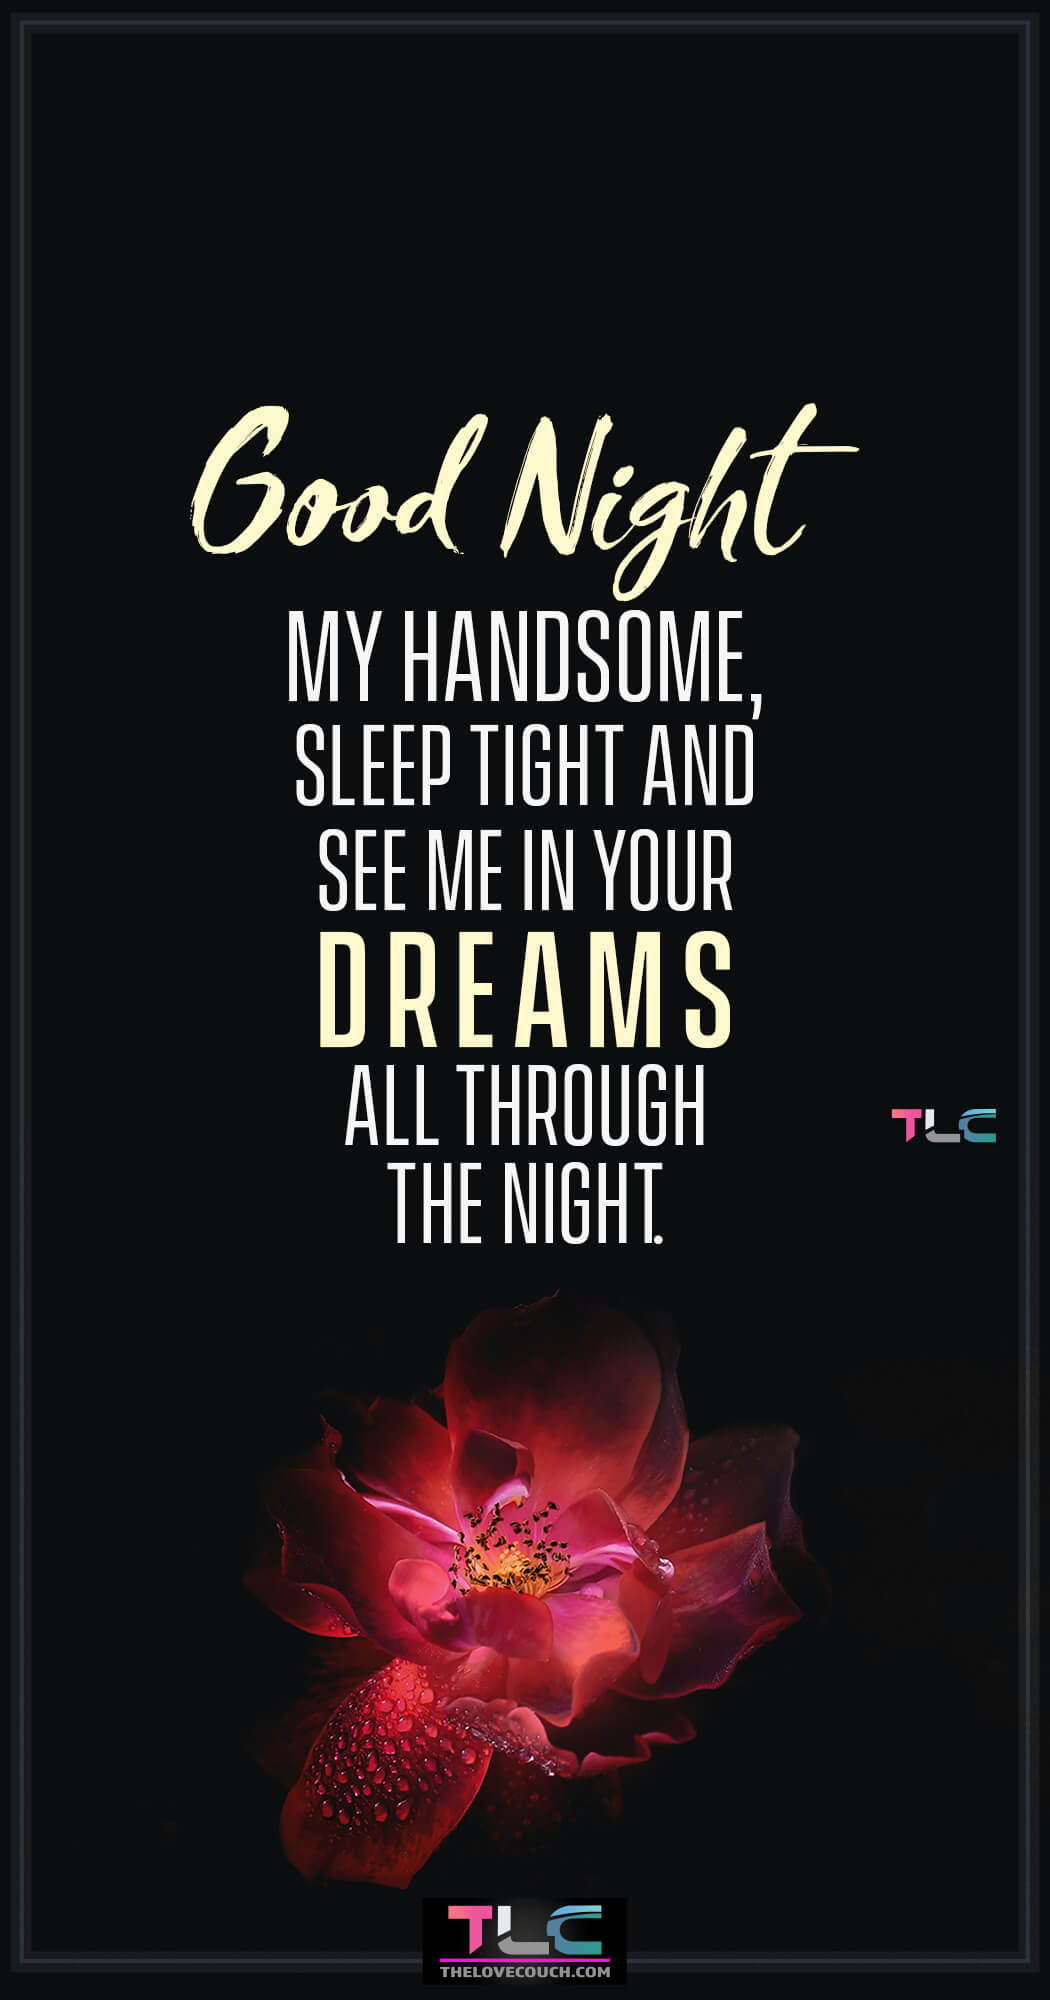 Good Night my handsome, sleep tight and see me in your dreams all through the night. The night is a time to rest and have a peaceful good night's sleep. Send your husband or boyfriend some romantic good night message for him to wish him a rejuvenating good night rest and to let him know that you're thinking of him. Also, find more good night message for him and those sweet romantic good night message for him along with some cute and flirty goodnight texts for him to make him go crazy over you.